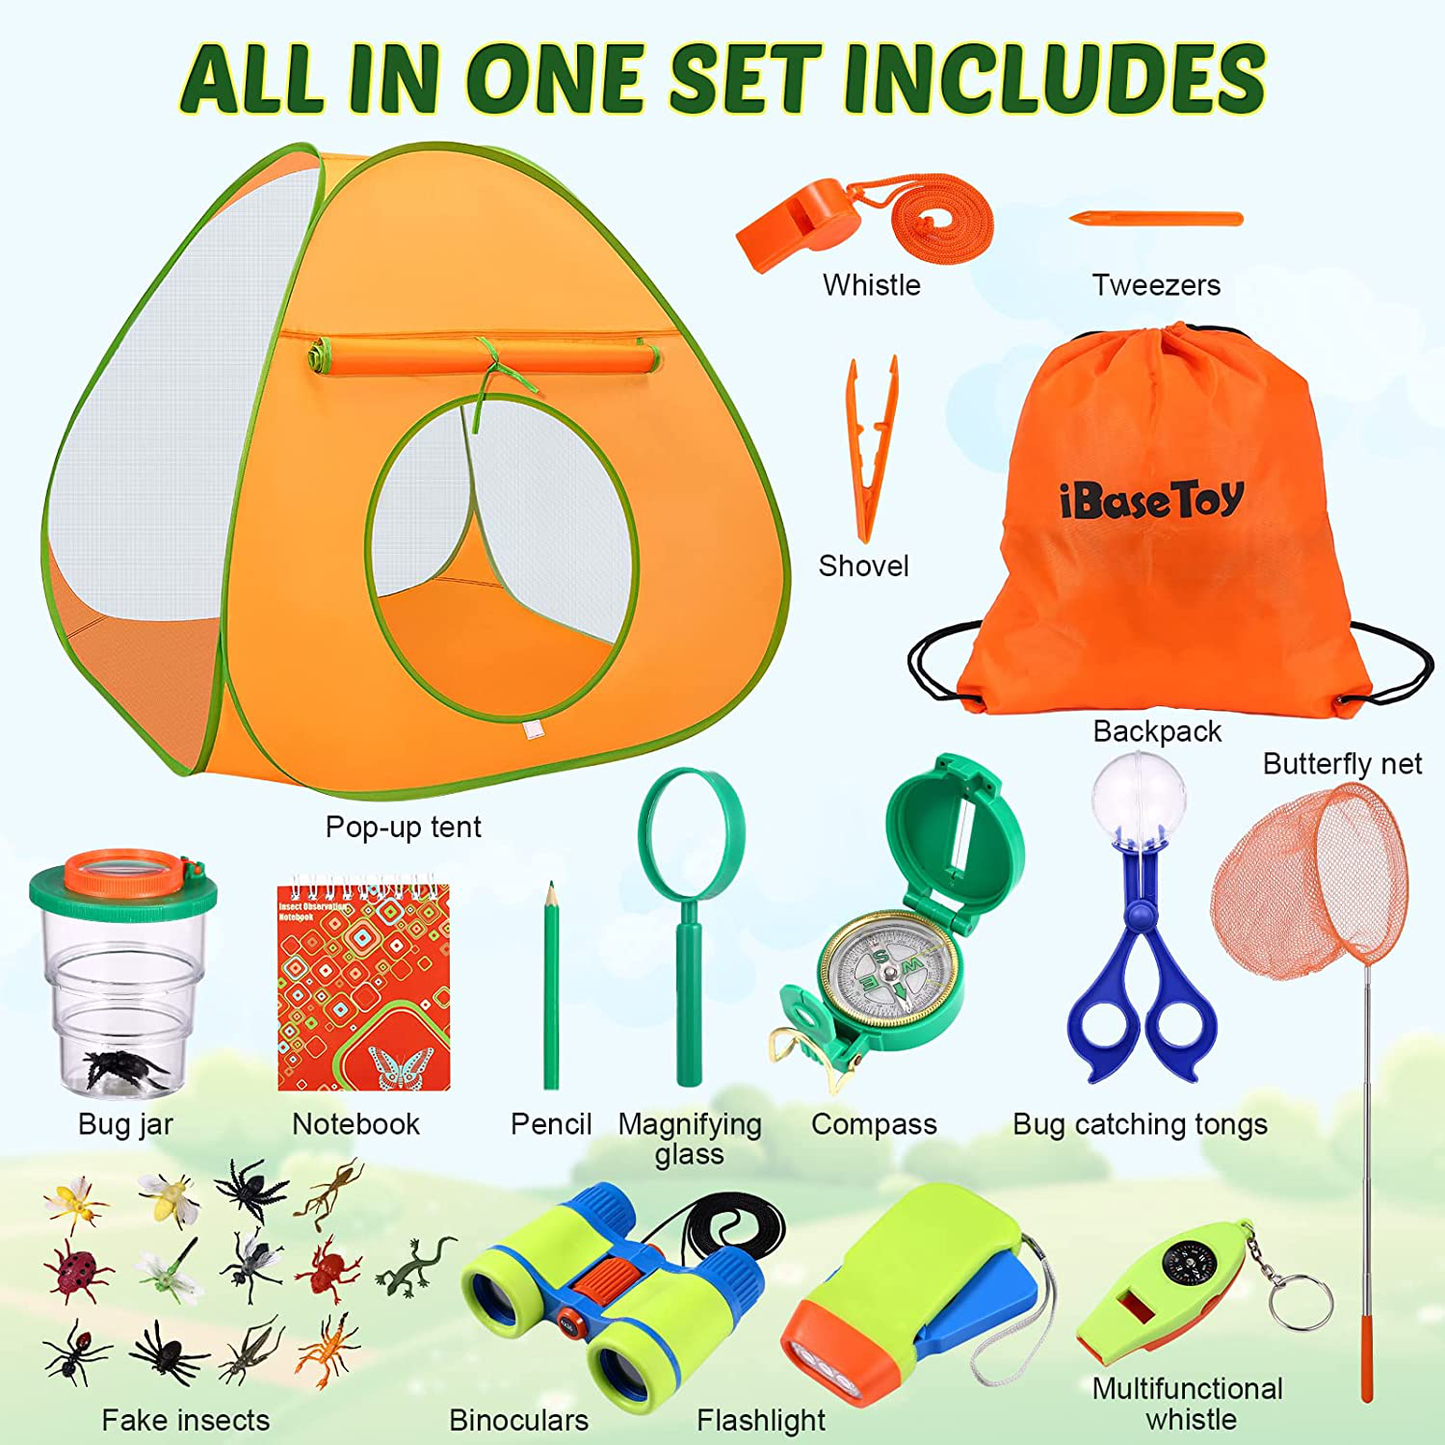 Ibasetoy Kids Camping Set with Tent 28 PCS - Camping Toys Adventure Kit for Kids Toddlers Boys - Including Binoculars, Compass, Flashlight, Bug Catching Kit, Camping Tent and Etc